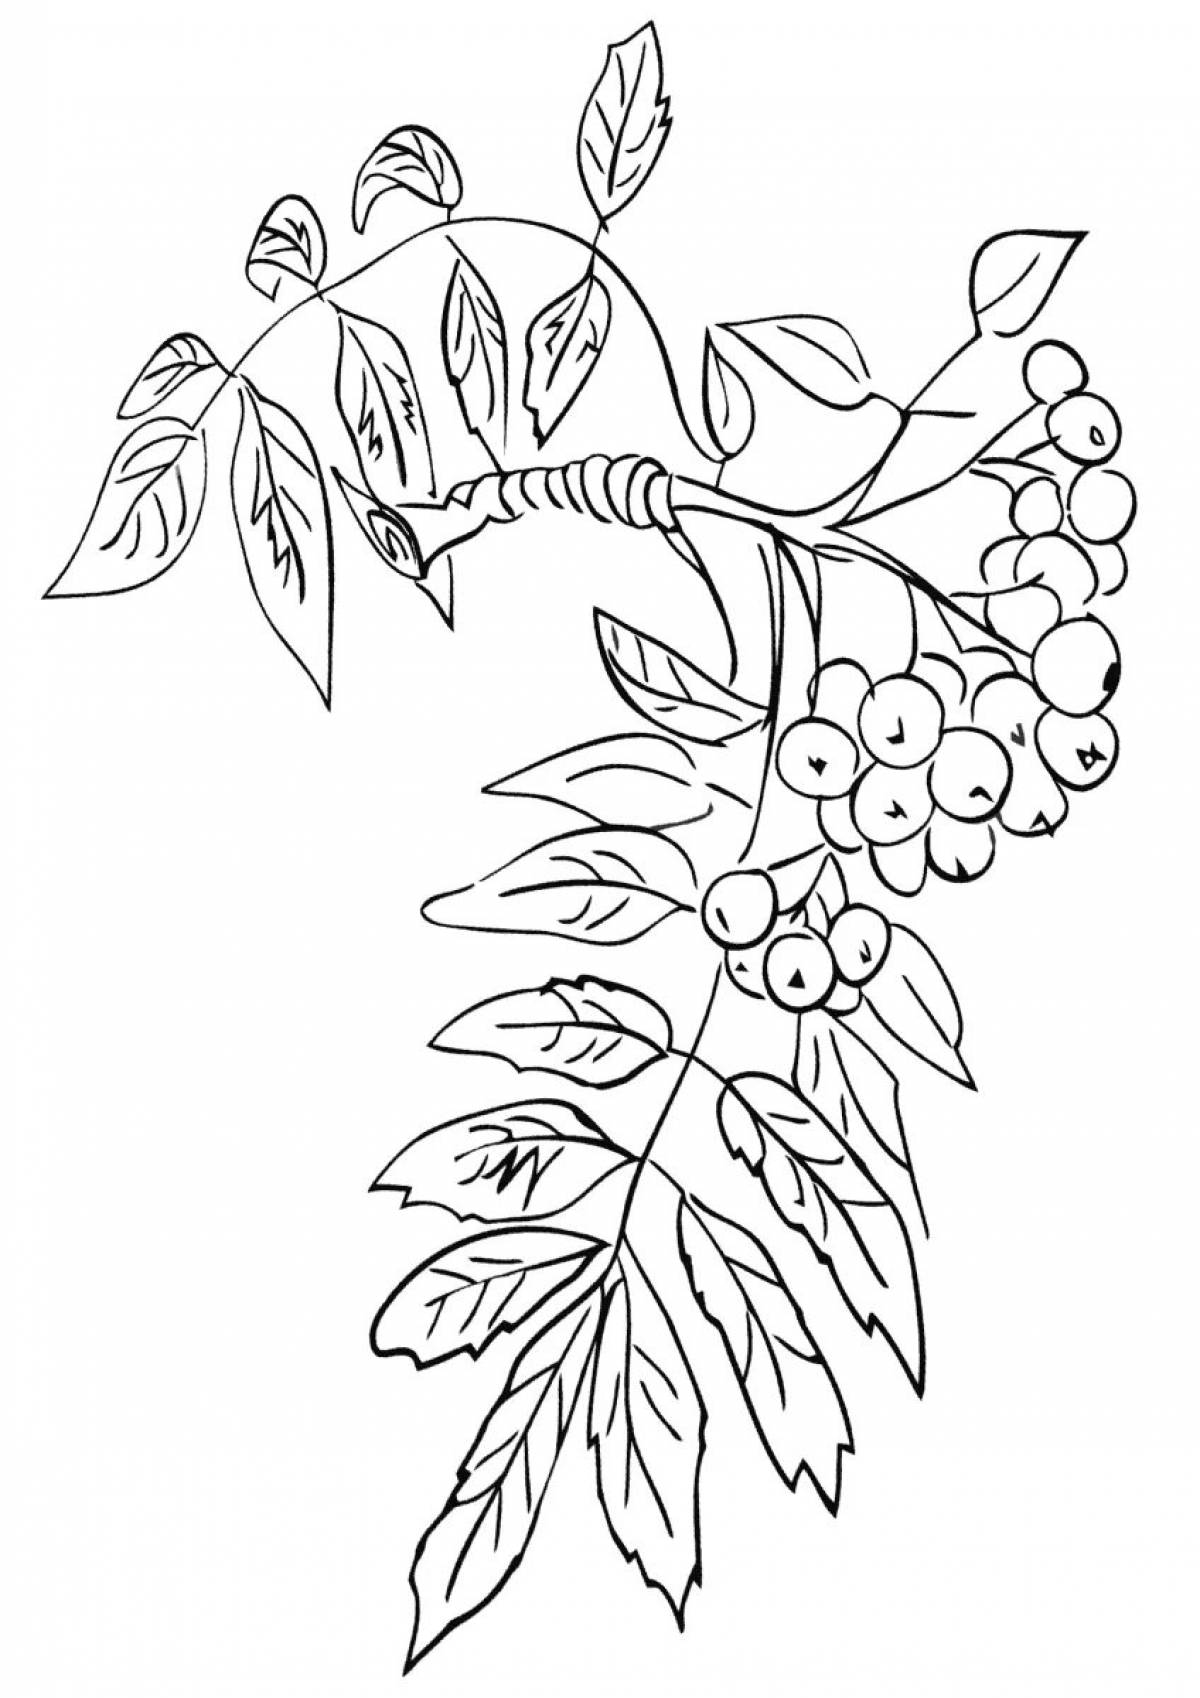 Living mountain ash coloring for children